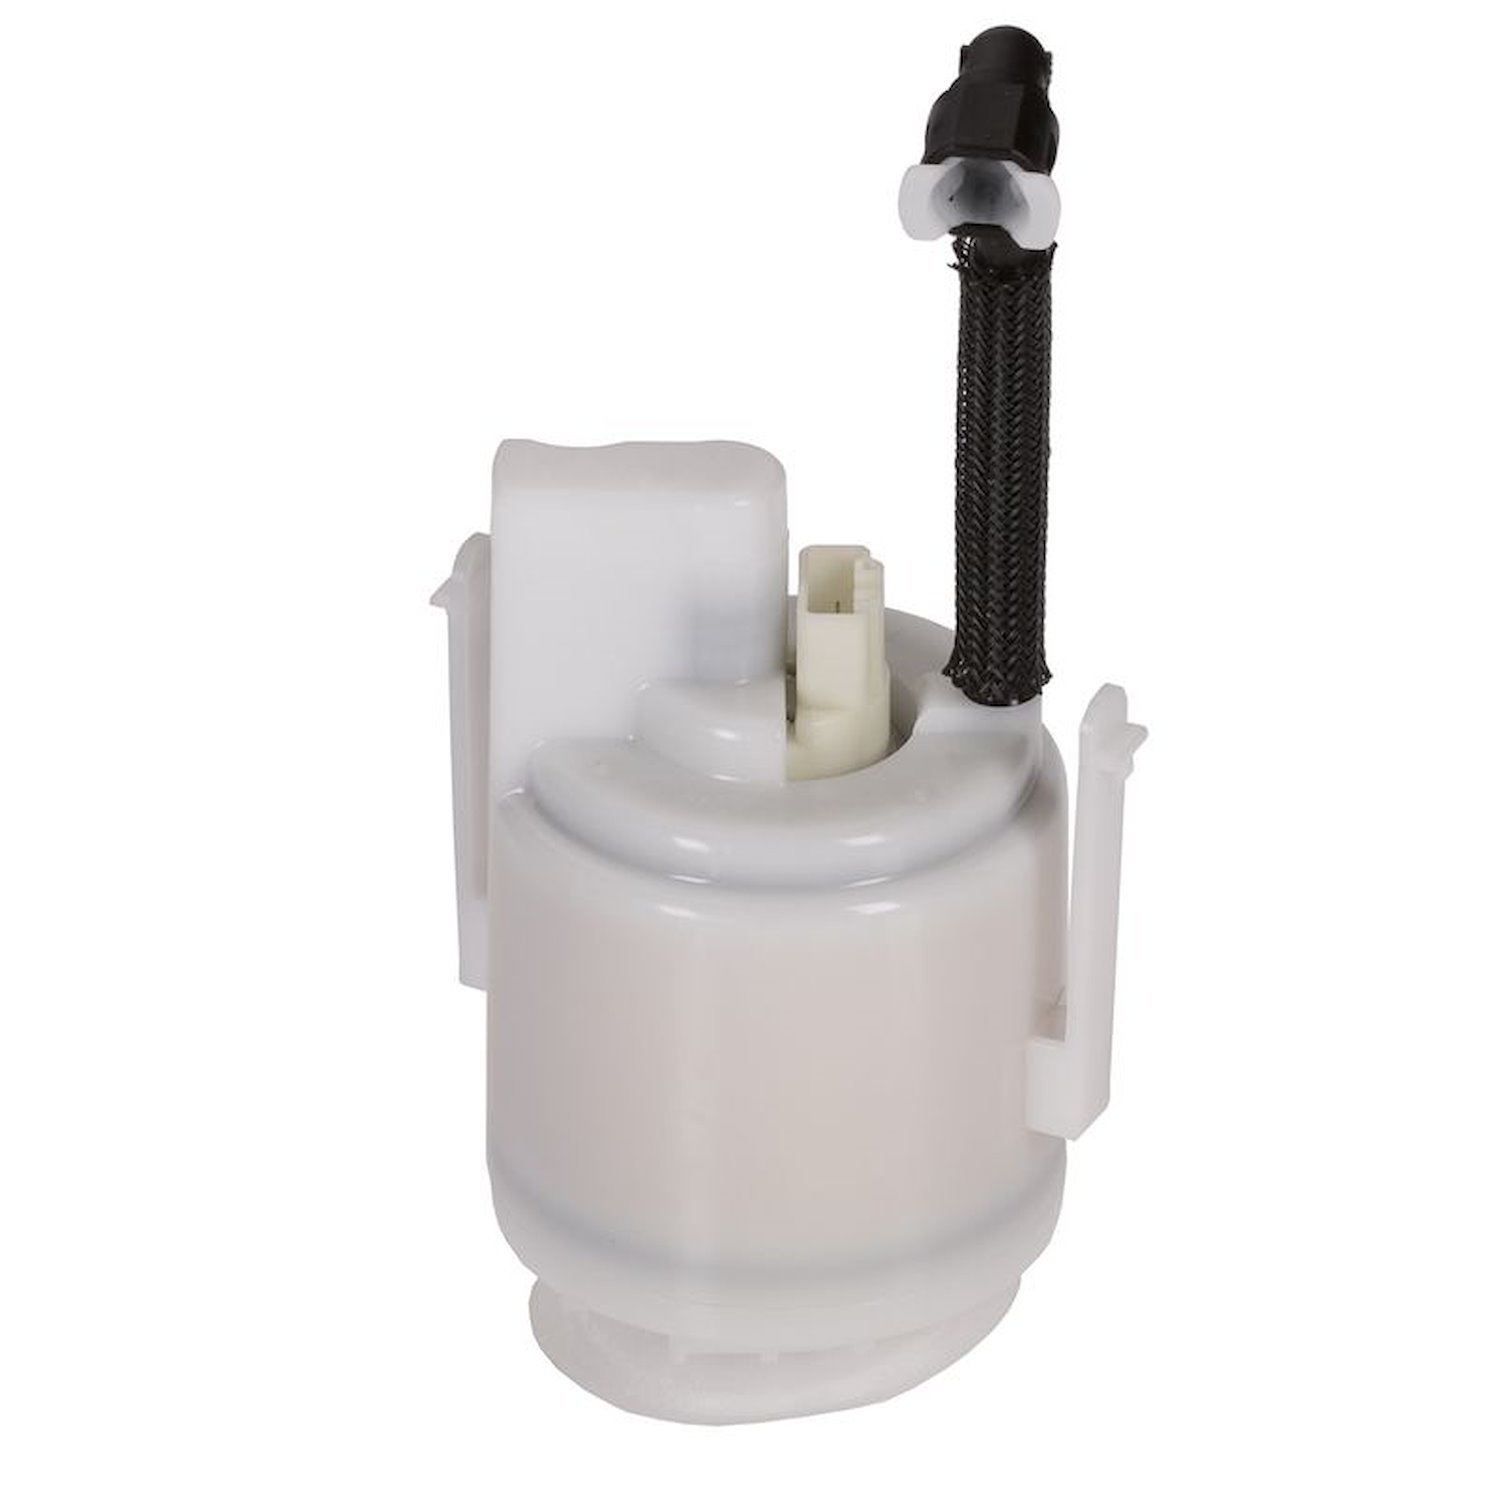 OE Replacement Fuel Pump Module Assembly for 2000-2002